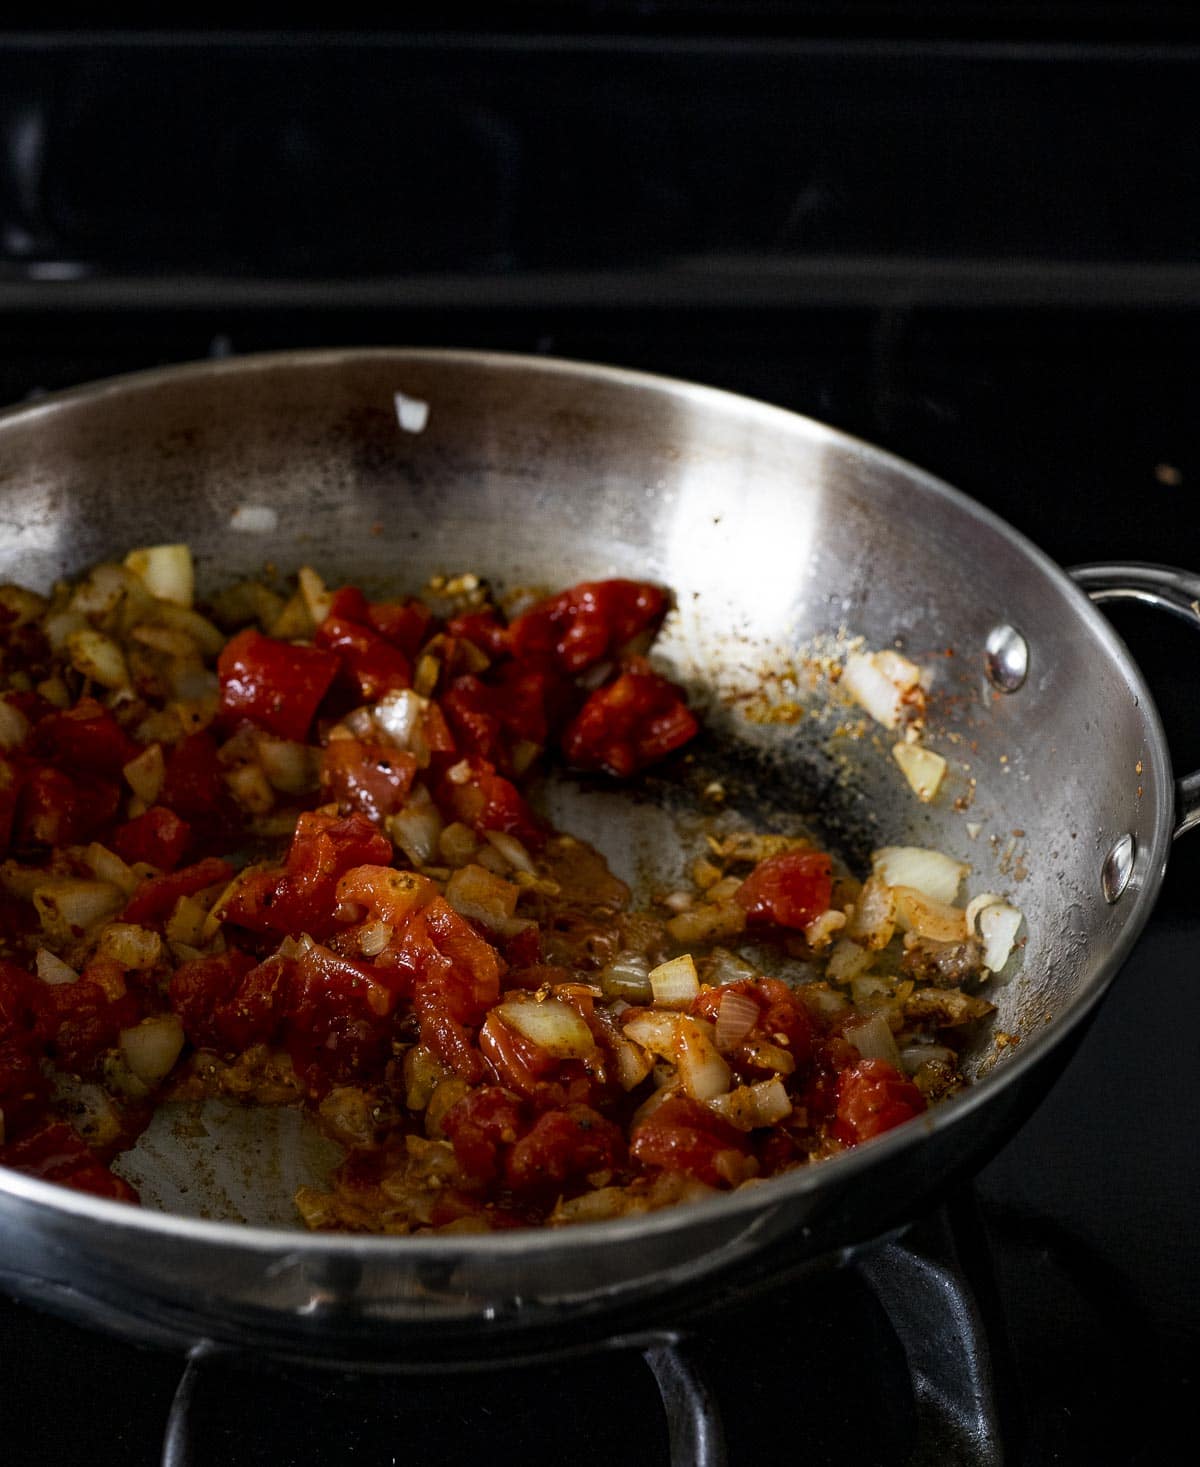 Tomatoes and aromatics being sautéed in a skillet.